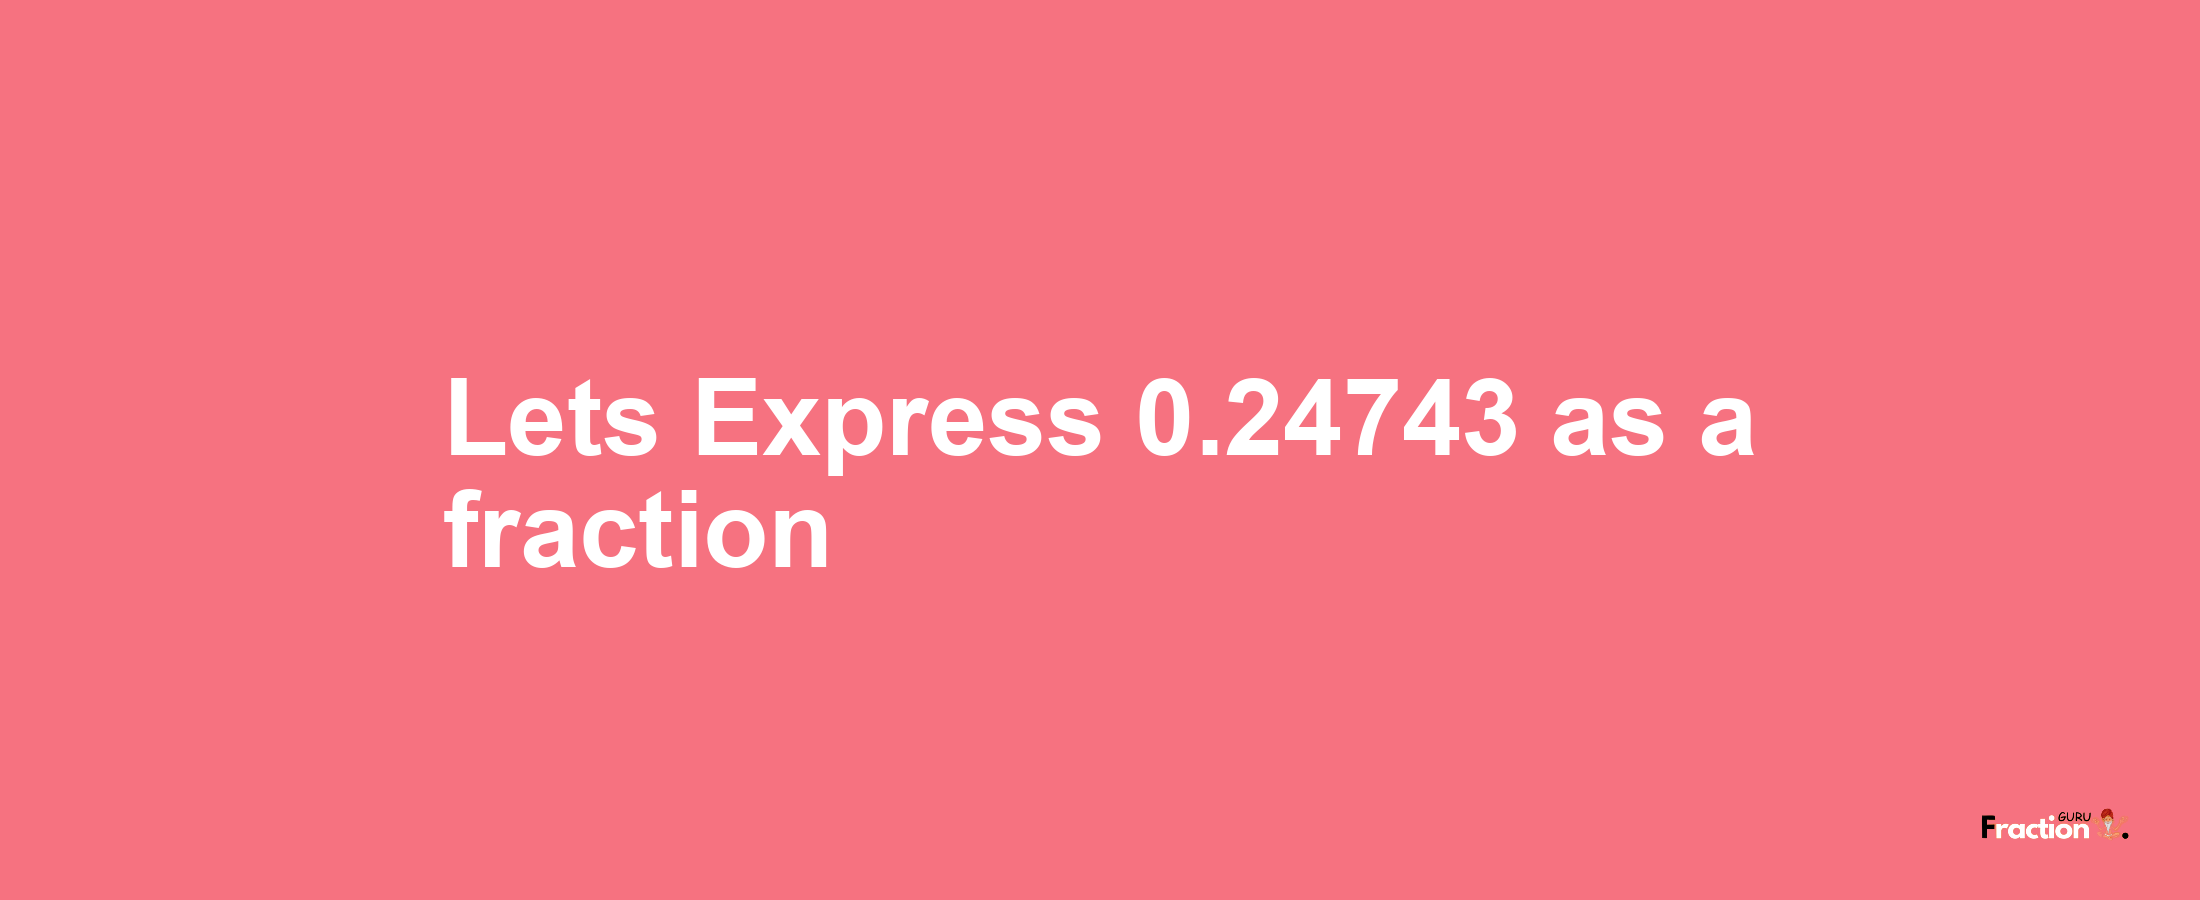 Lets Express 0.24743 as afraction